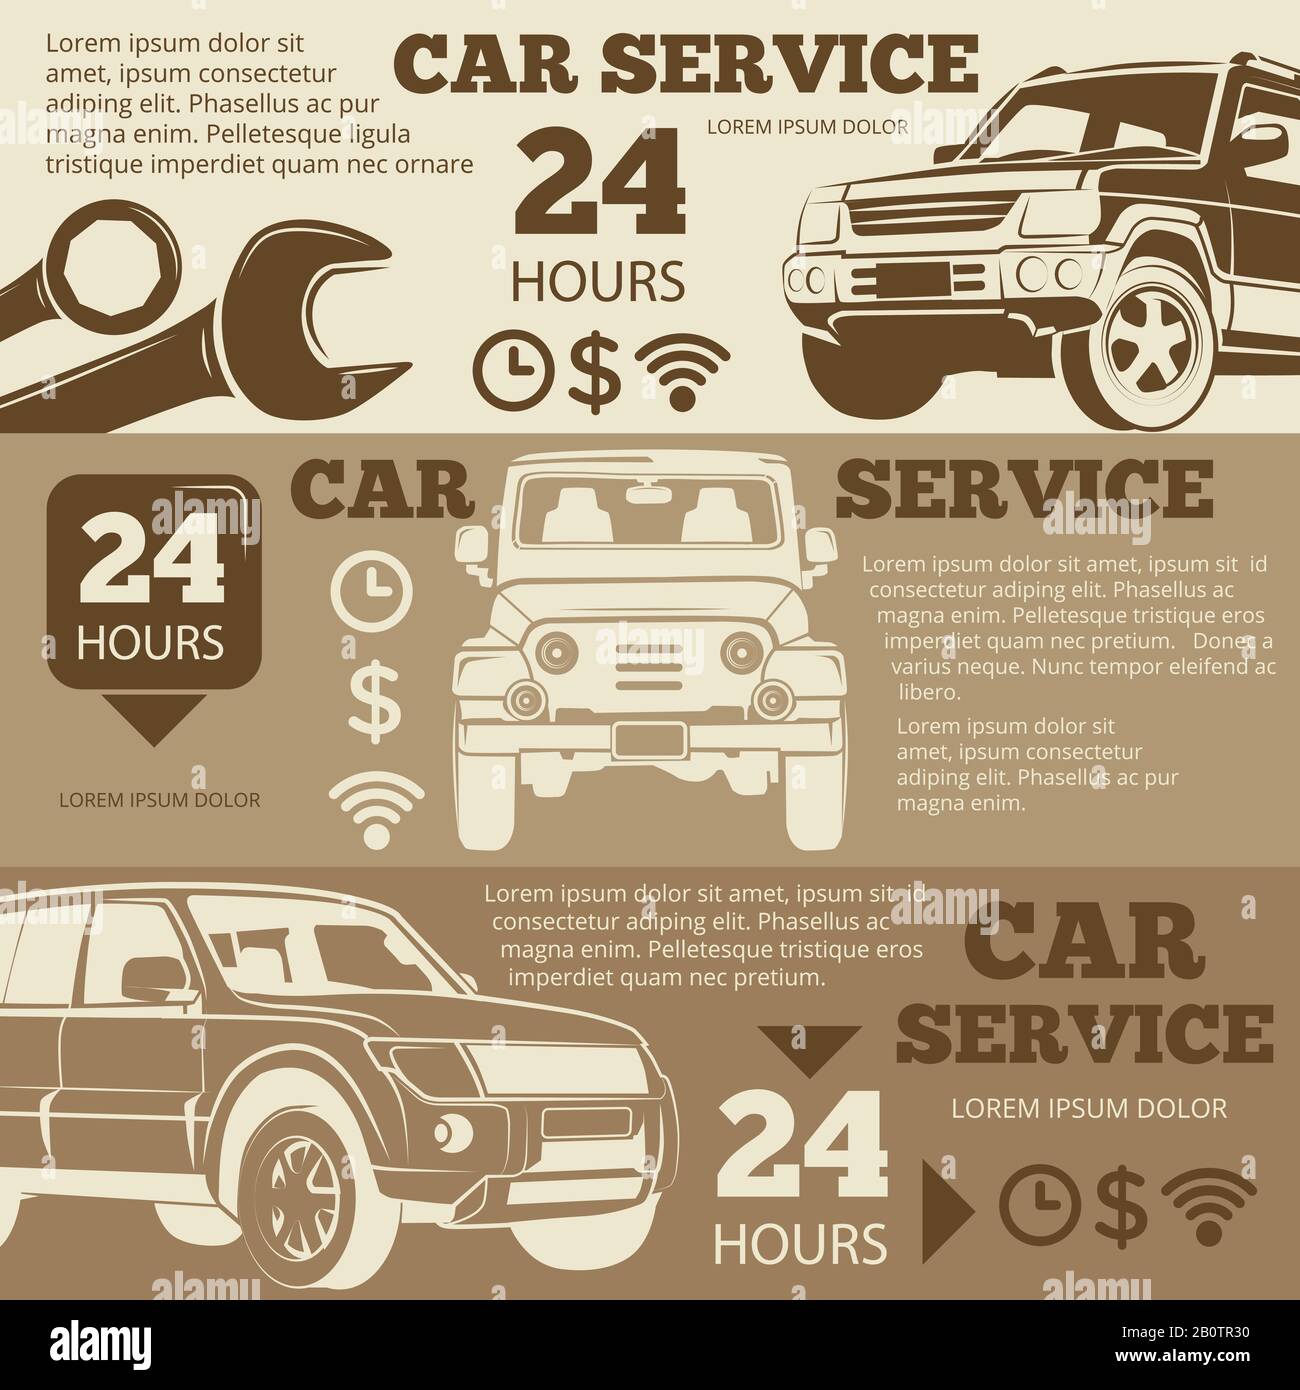 Off-road car service vintage banners collection. Automobile banner, vector illustration Stock Vector